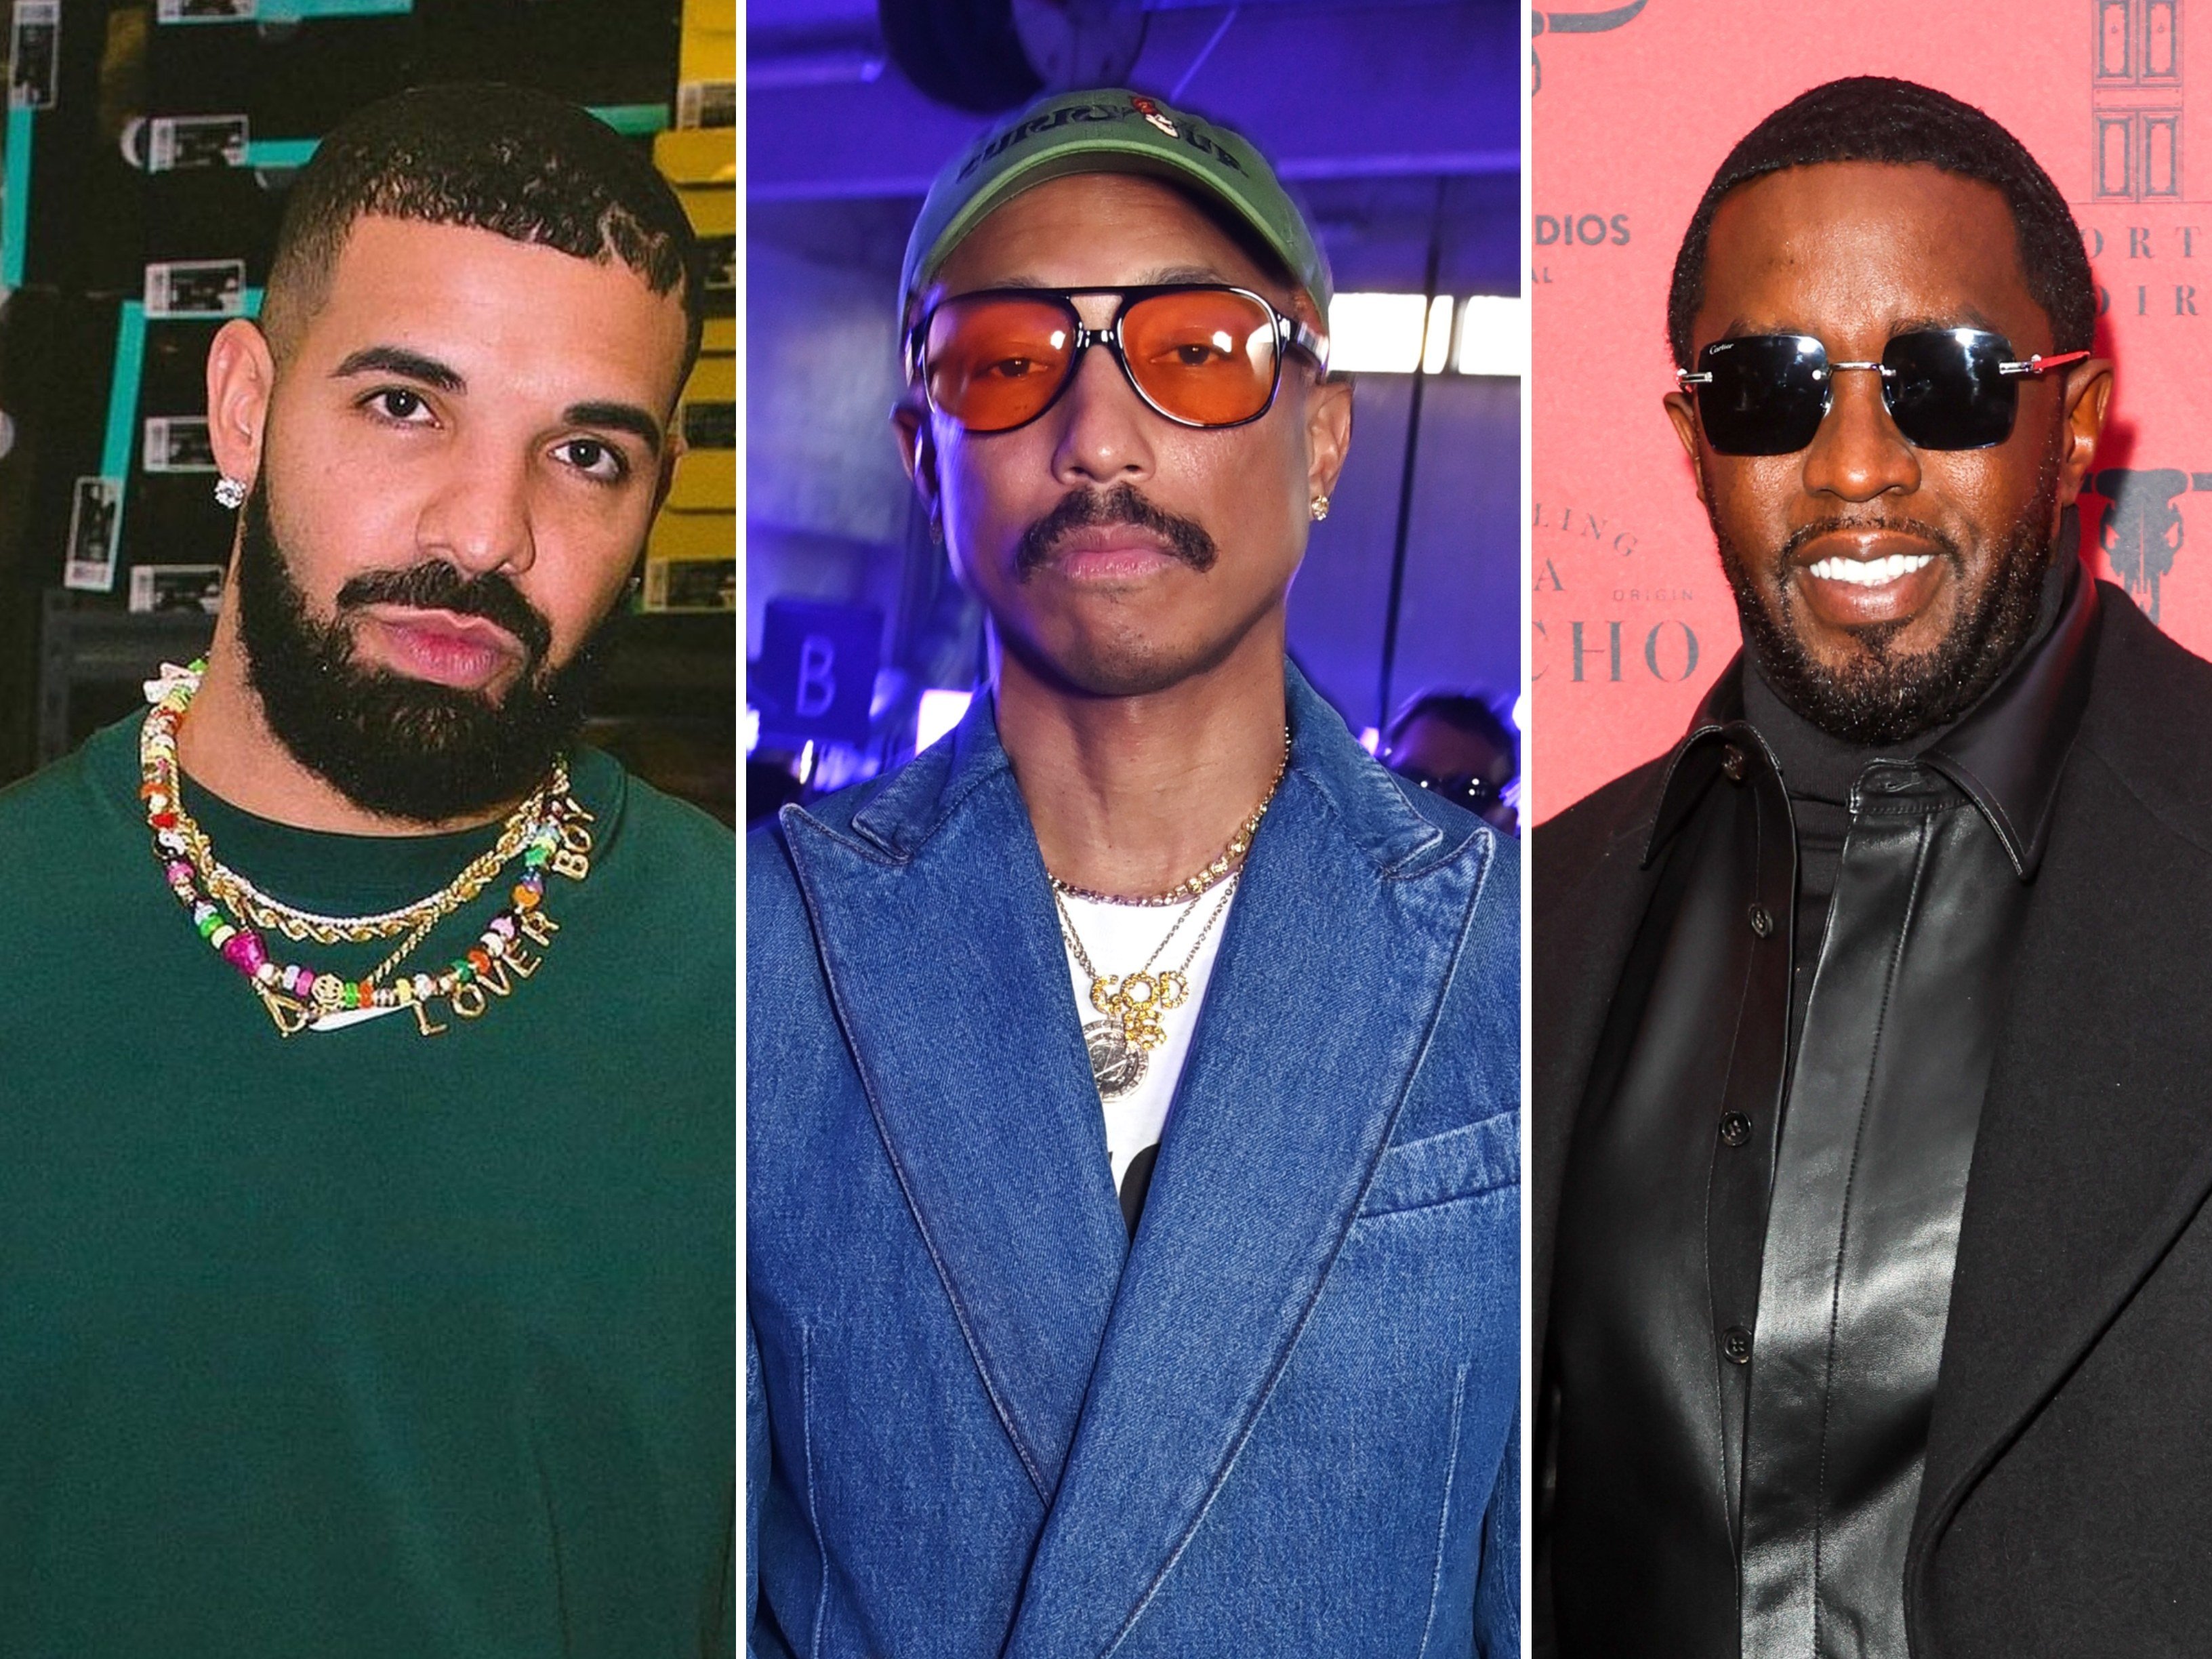 Drake, Pharrell Williams and Diddy are some of the richest hip-hop artists in 2023. Photos: @drakeofficlal/Instagram, Getty Images